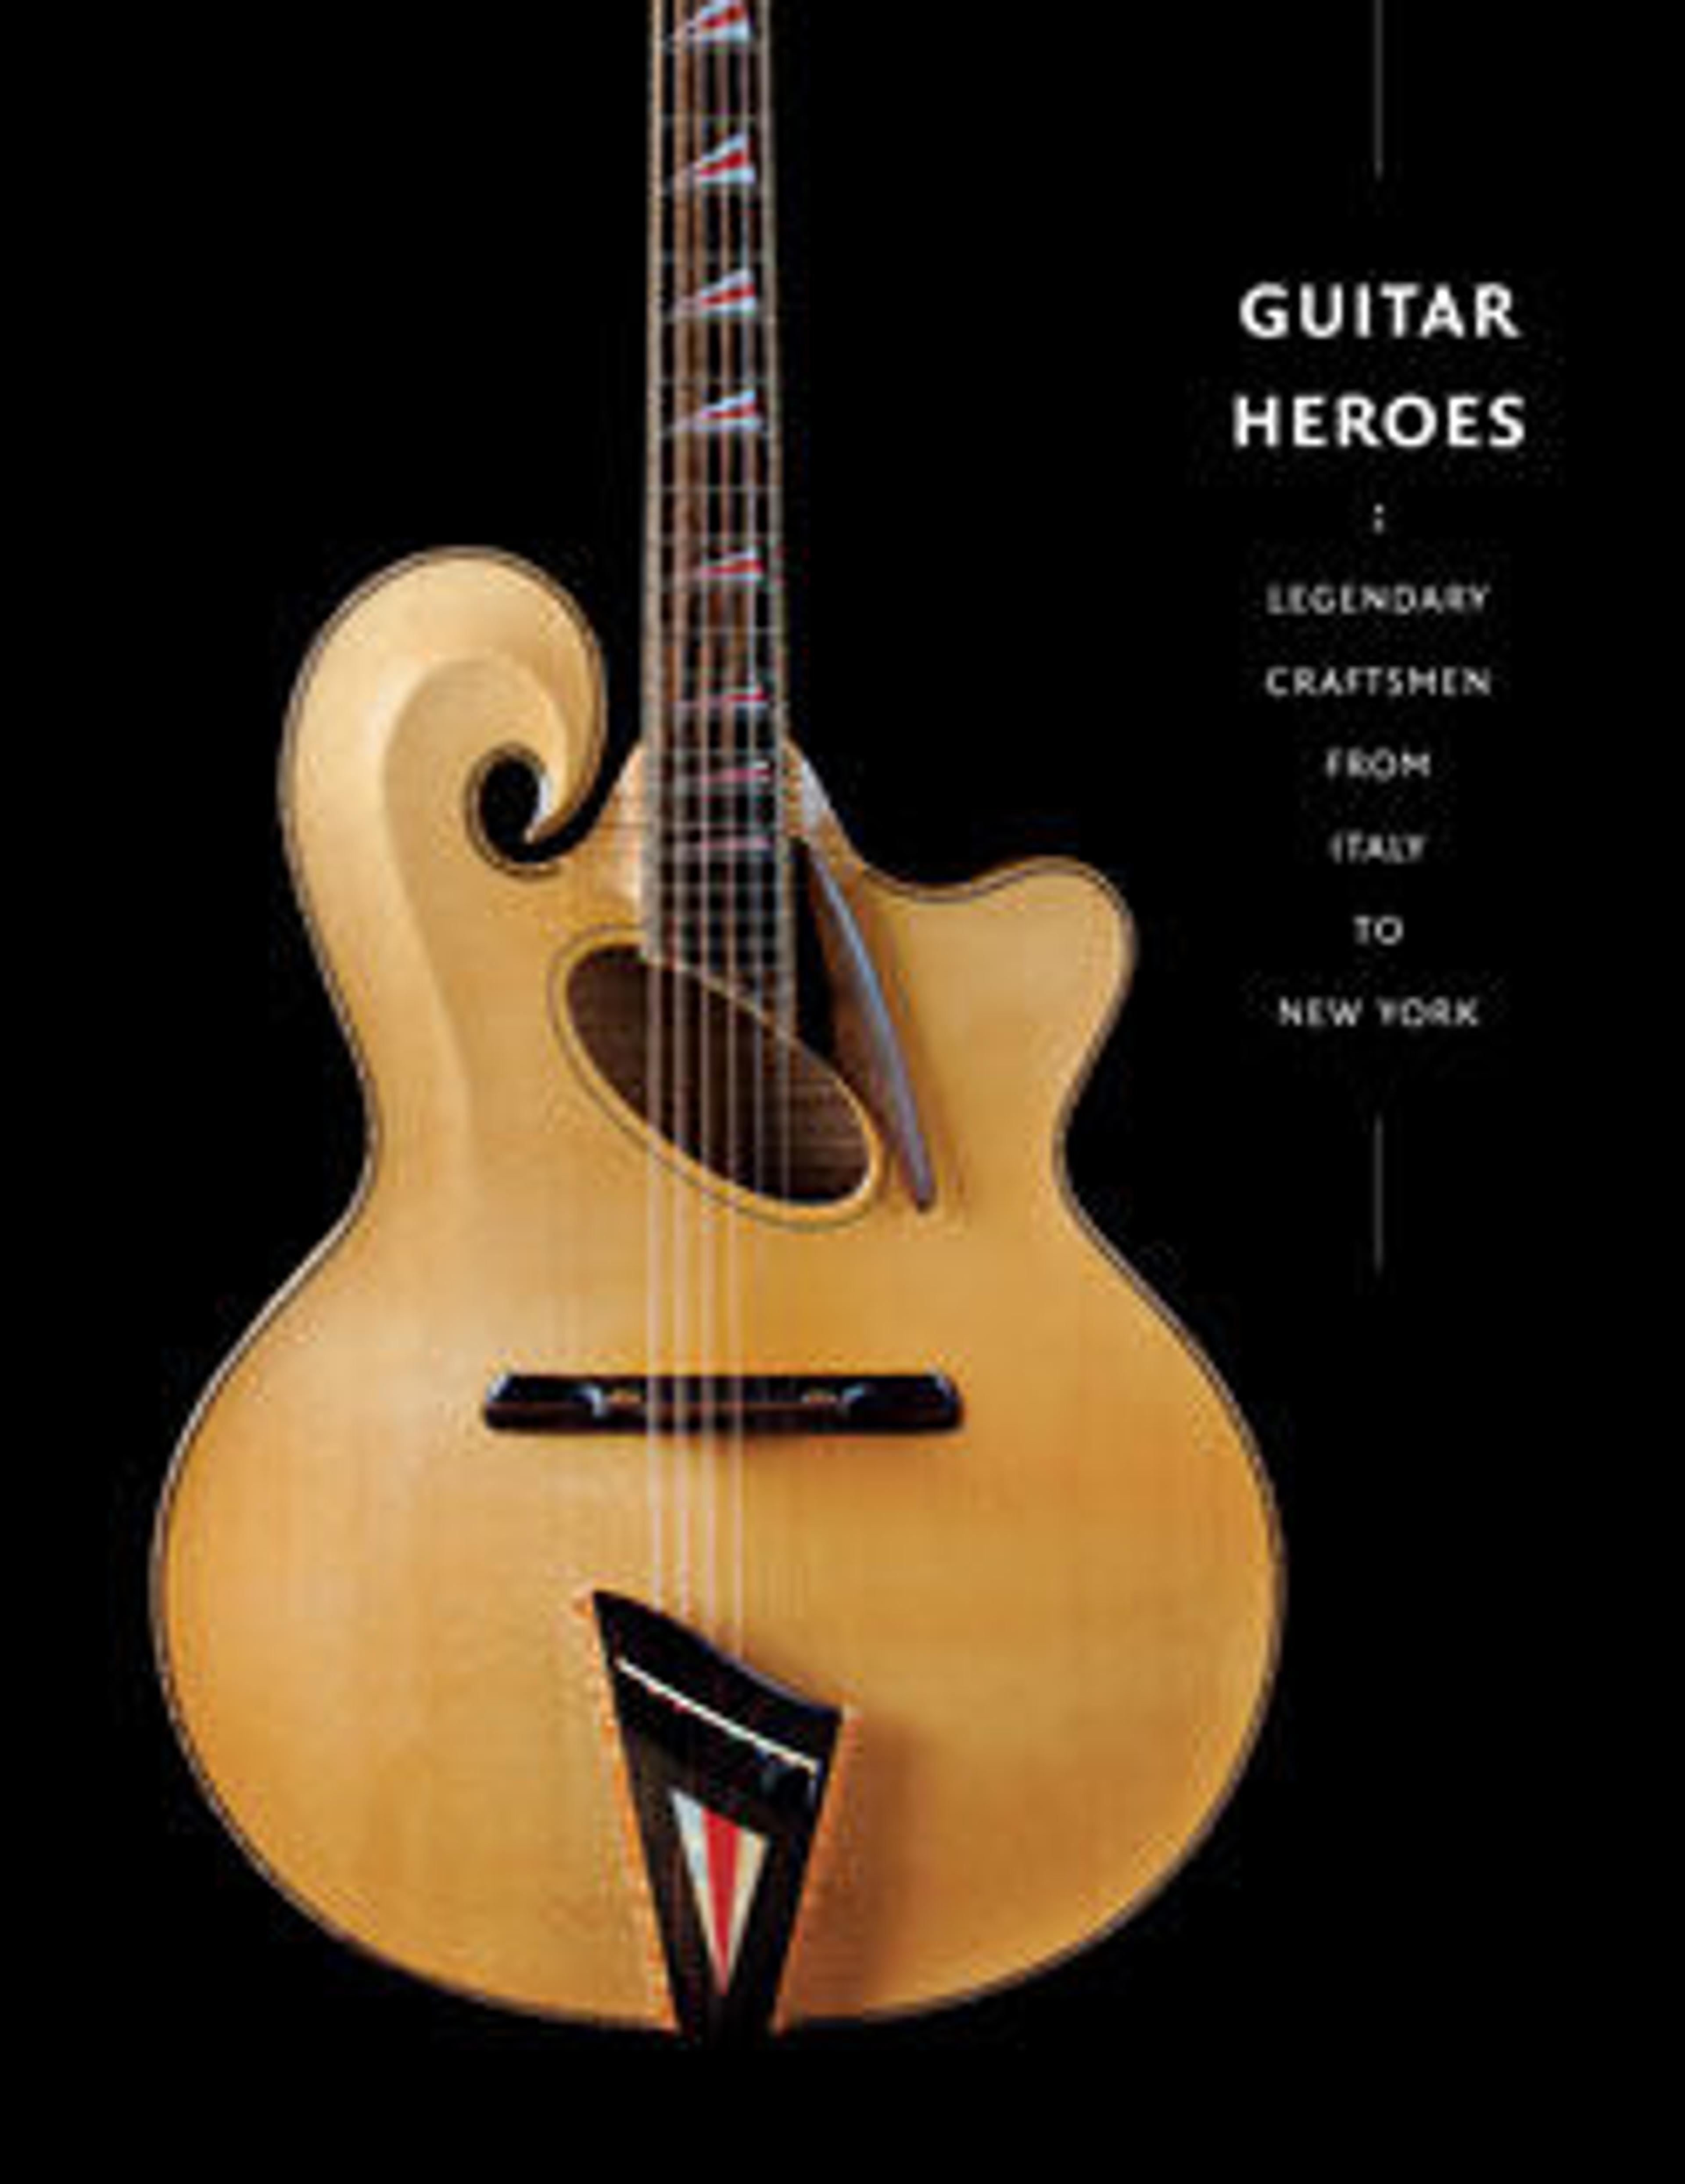 Guitar Heroes: Legendary Craftsmen from Italy to New York